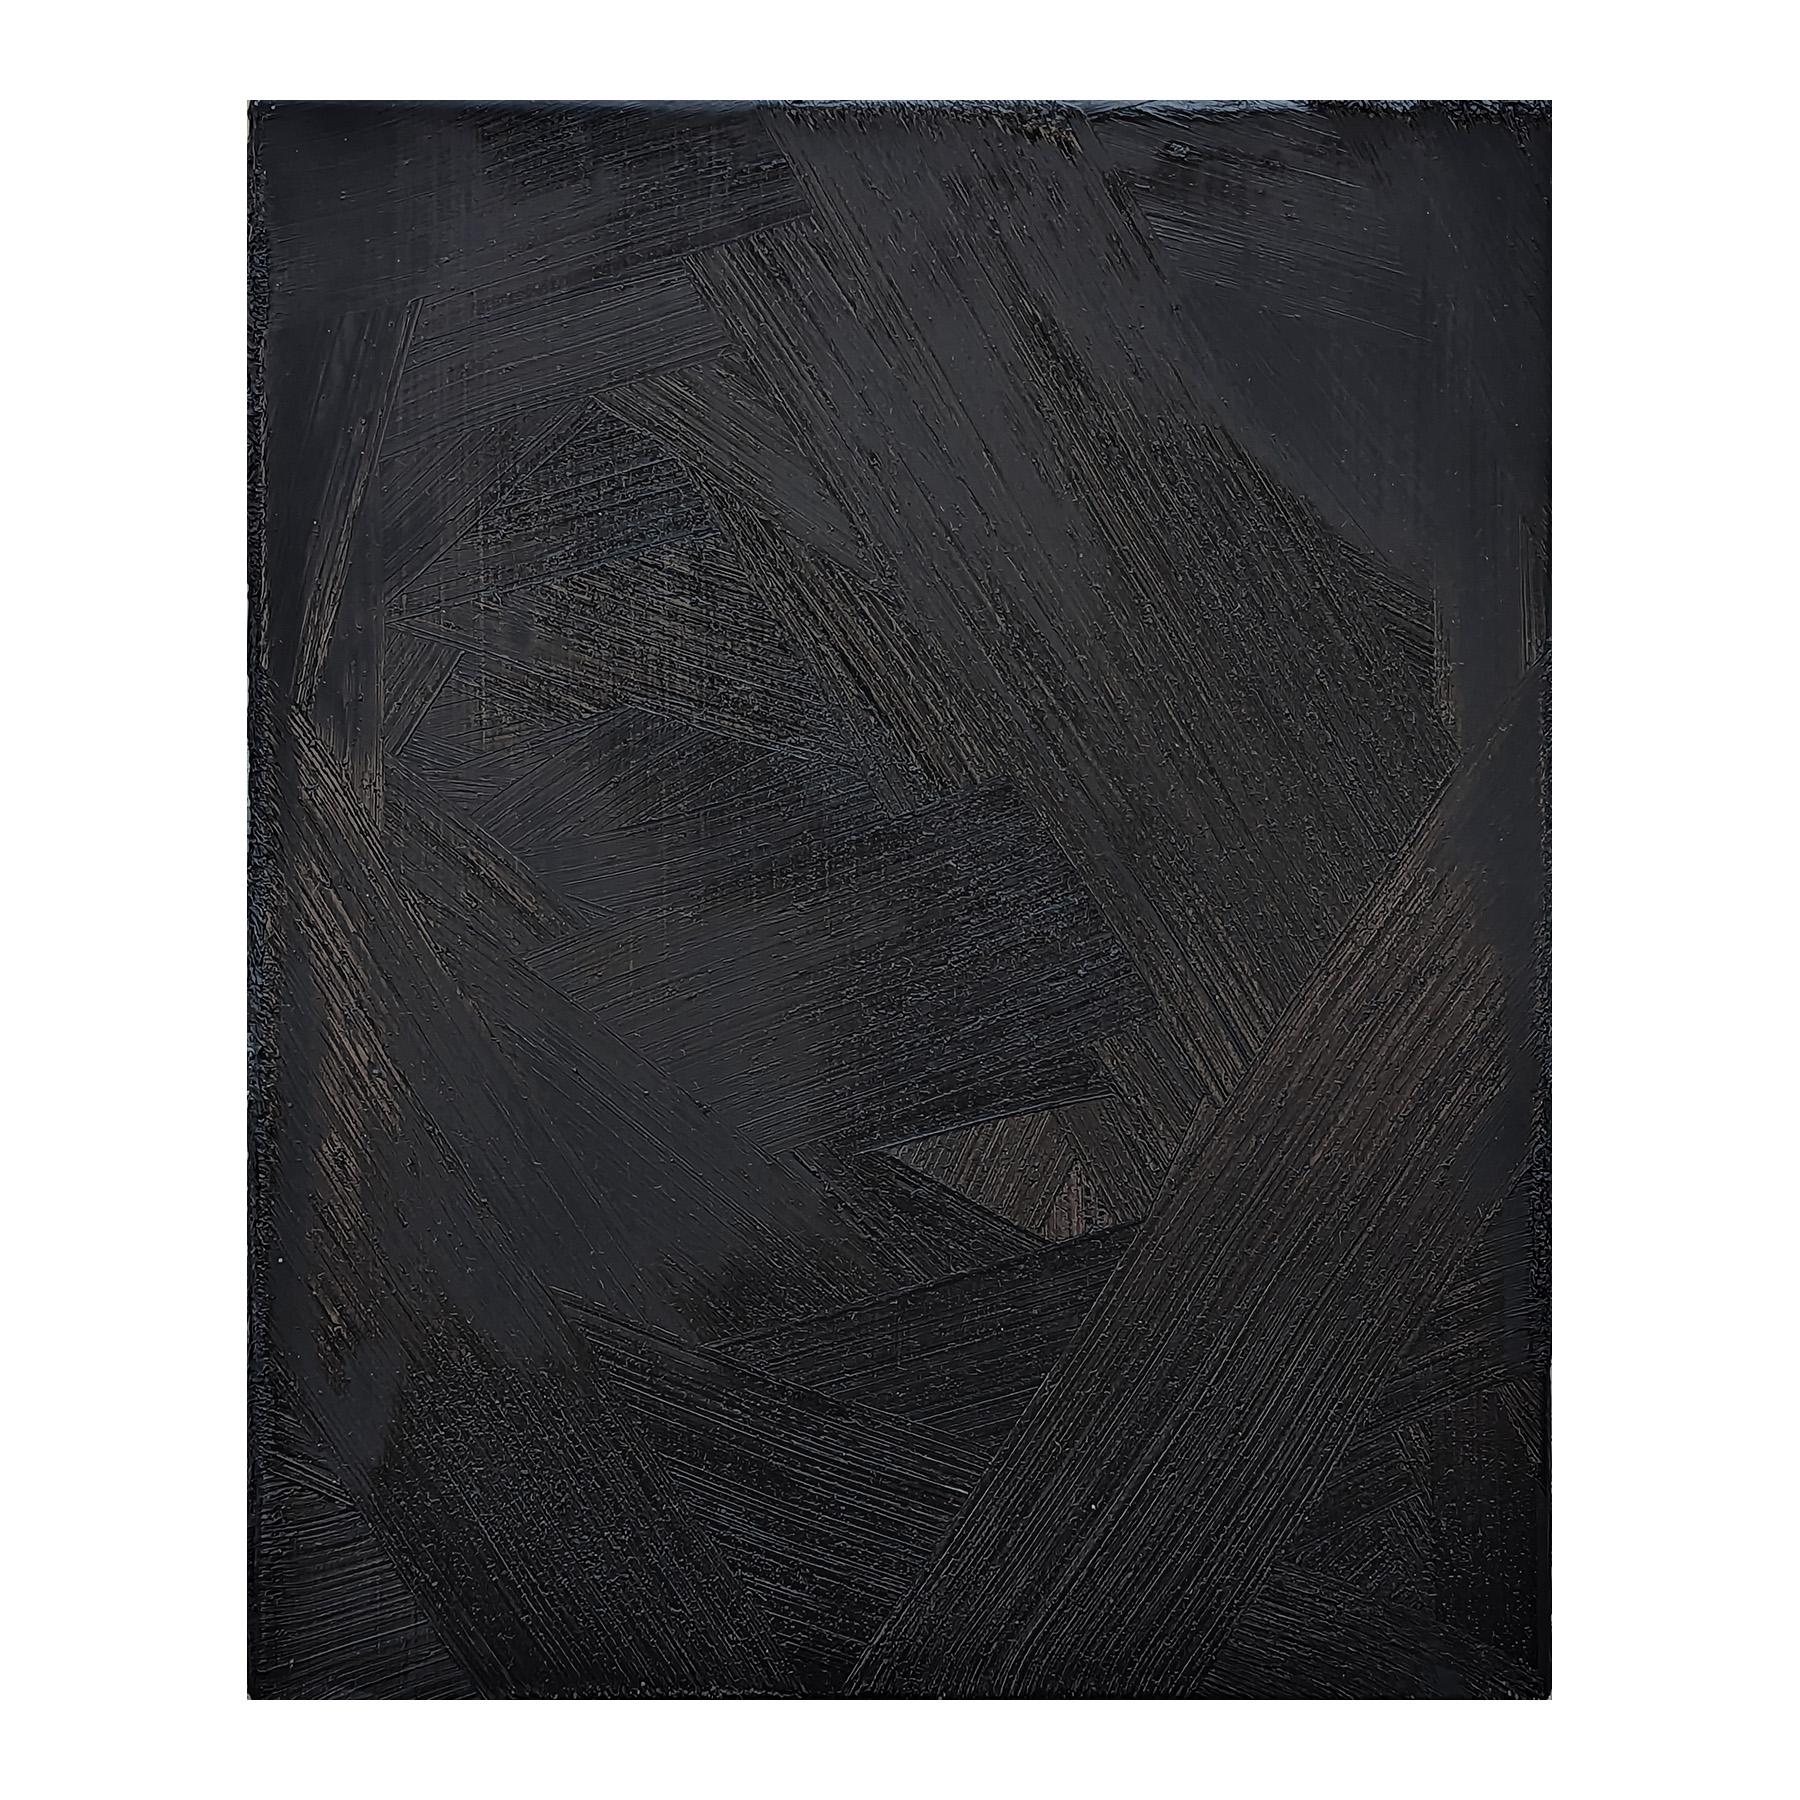 Black textured impasto painting by contemporary artist Paul Wiener. The work features a thick layer of intensely pigmented paint in which the viewer can easily see the artist's brushstrokes. The richness of the black color speaks to the the title of